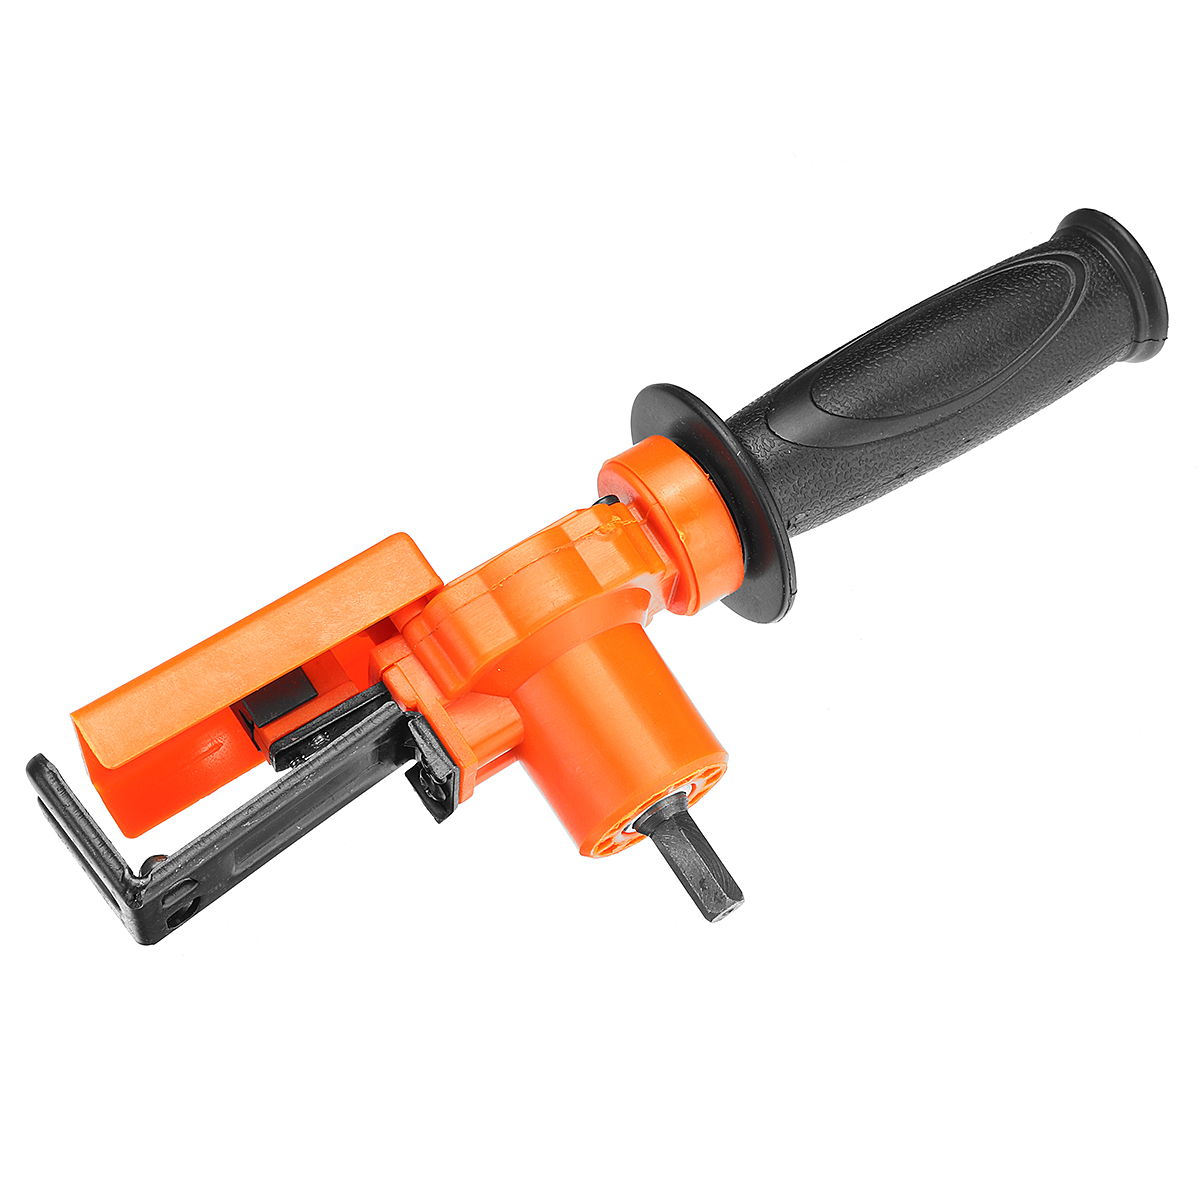 Reciprocating-Saw-Attachment-Adapter-Metal-Cutting-Tools-Electric-Drill-Attachment-2-Blades-1722798-5